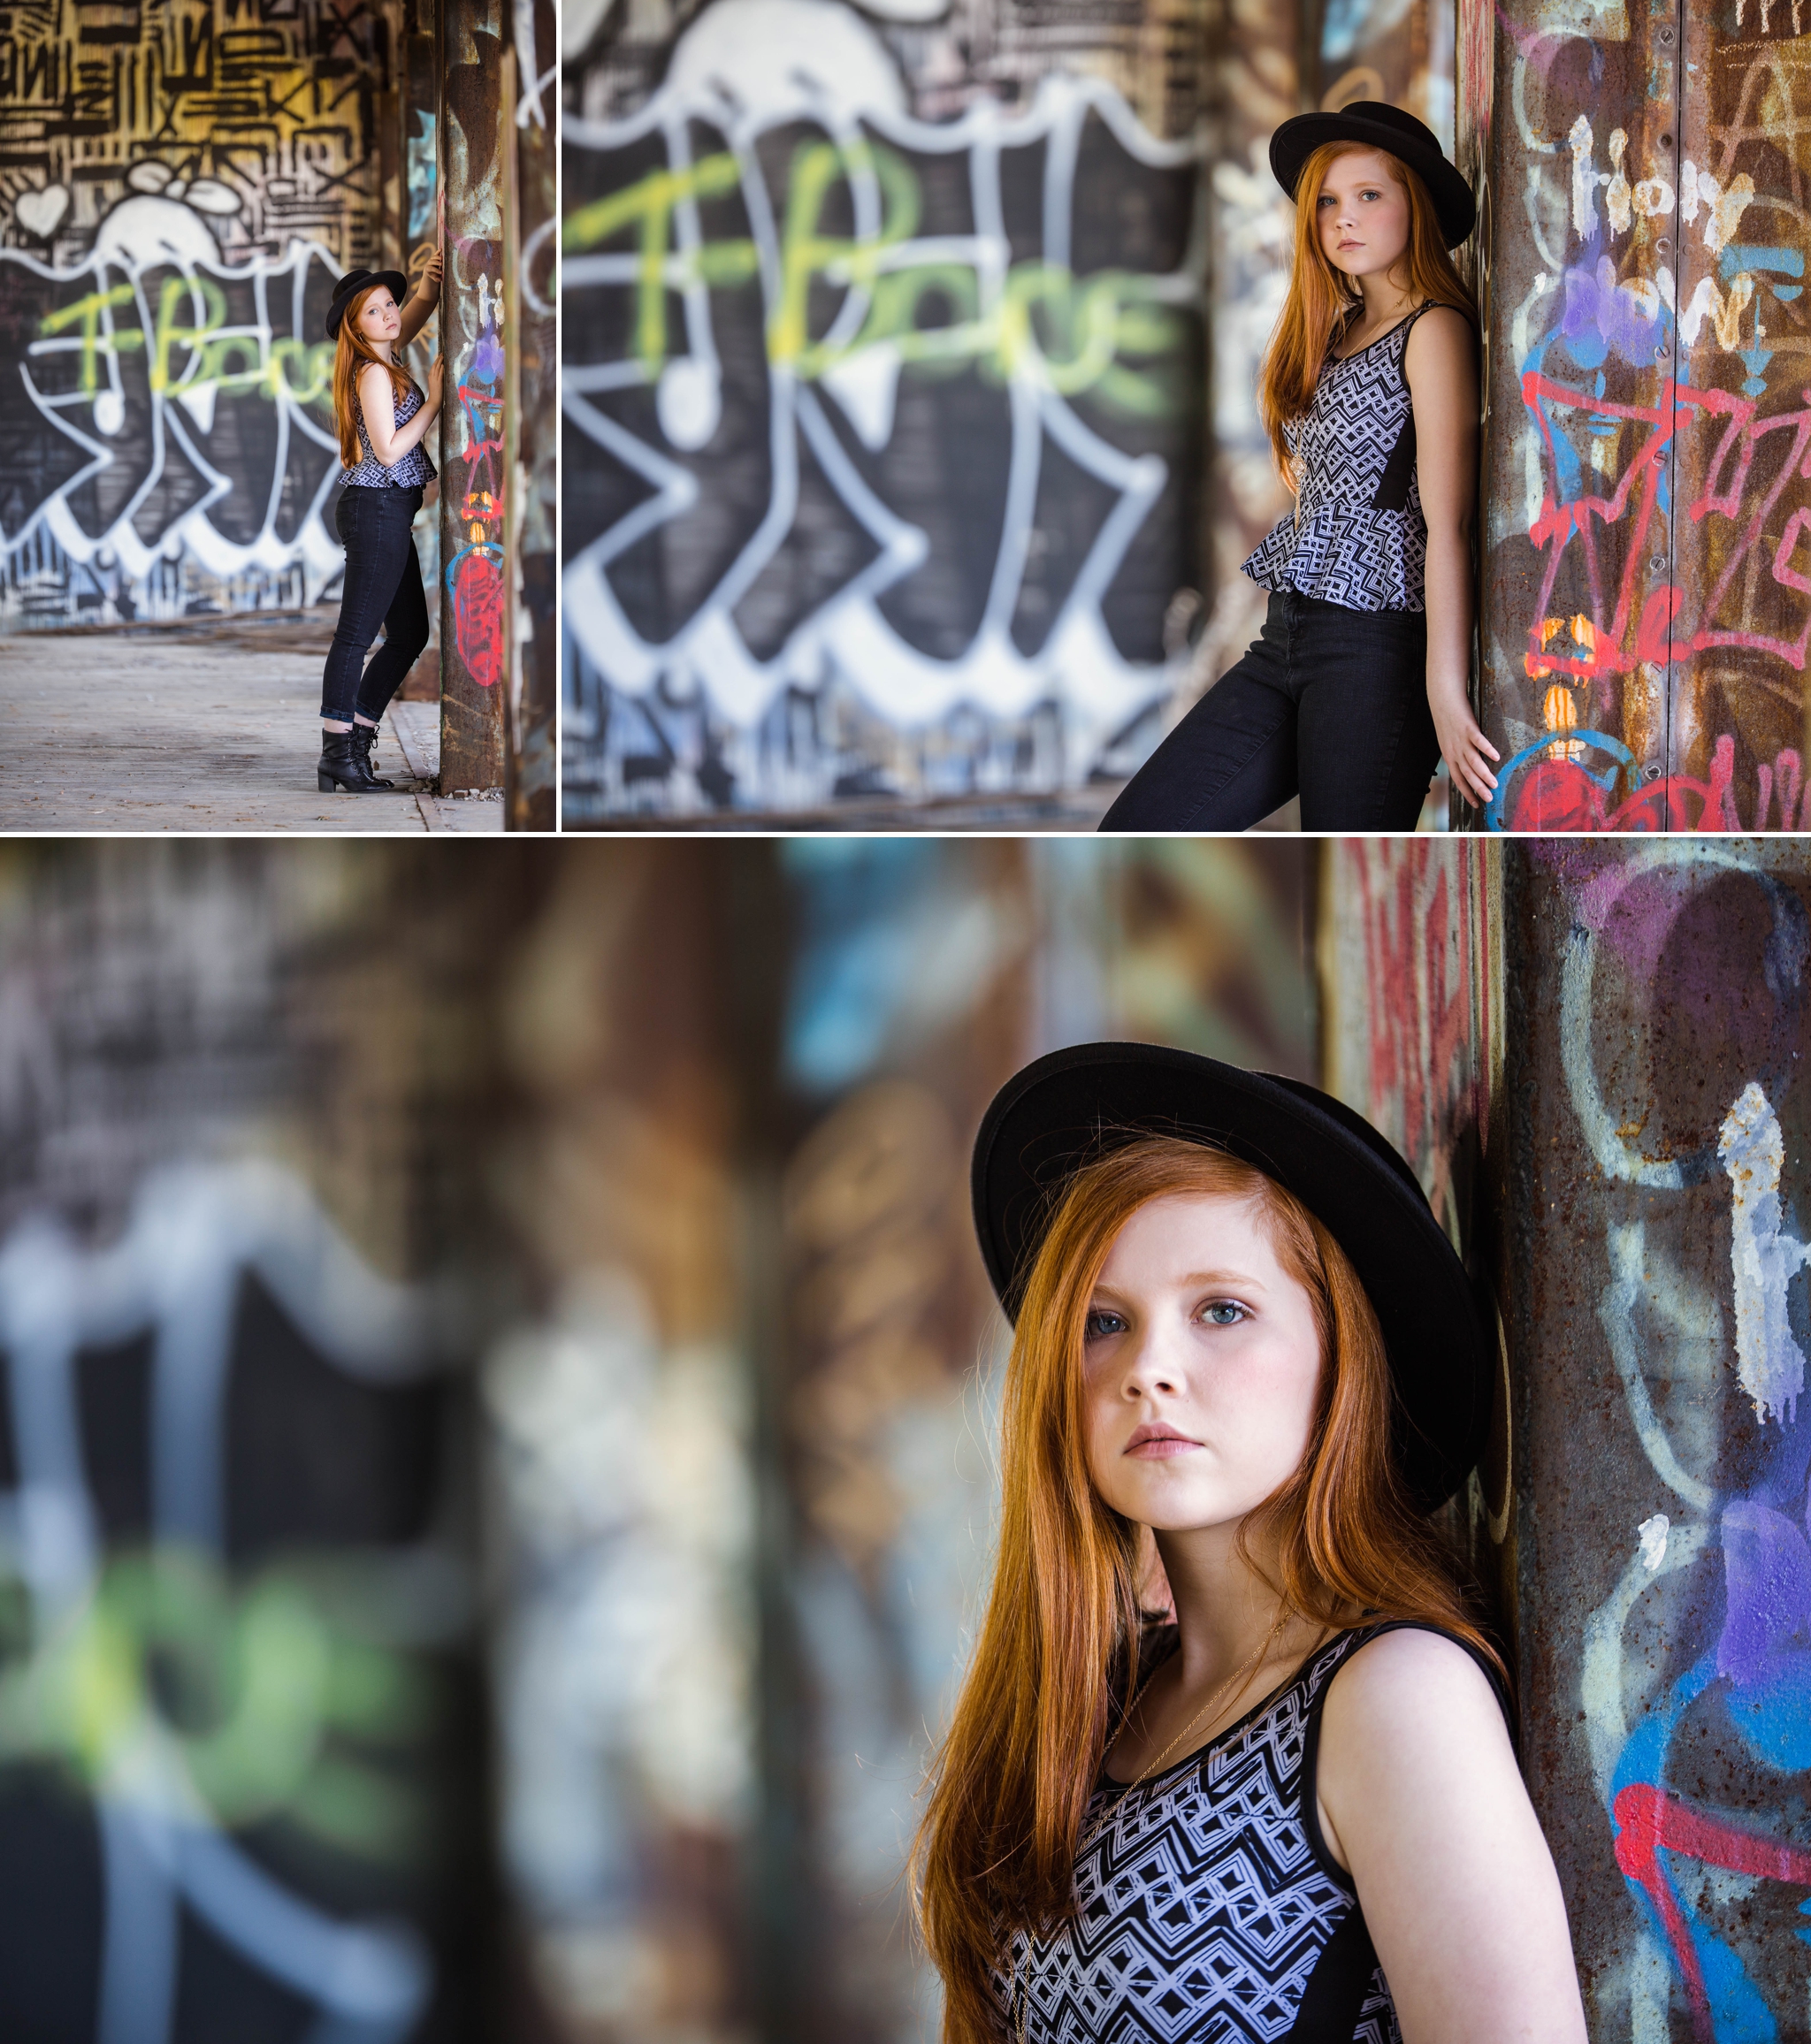 Savannah - Class of 2018 - Fayetteville North Carolina Senior Photography - Edgy Senior Session in old abandoned Building with Graffiti